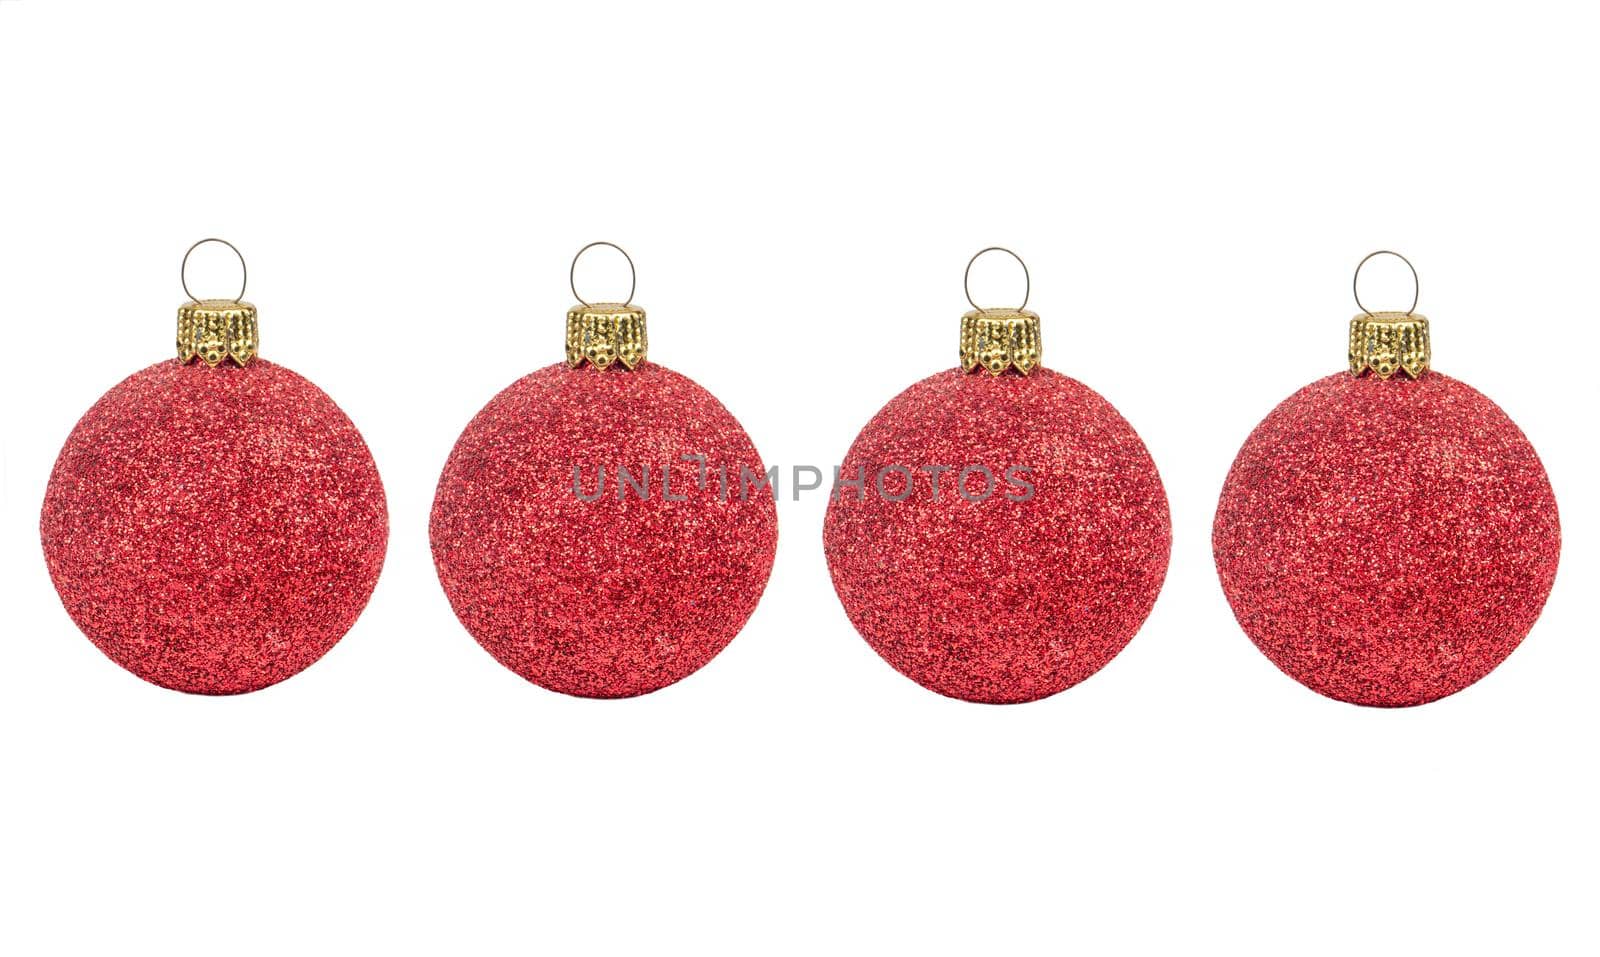 Four red Christmas balls by andregric